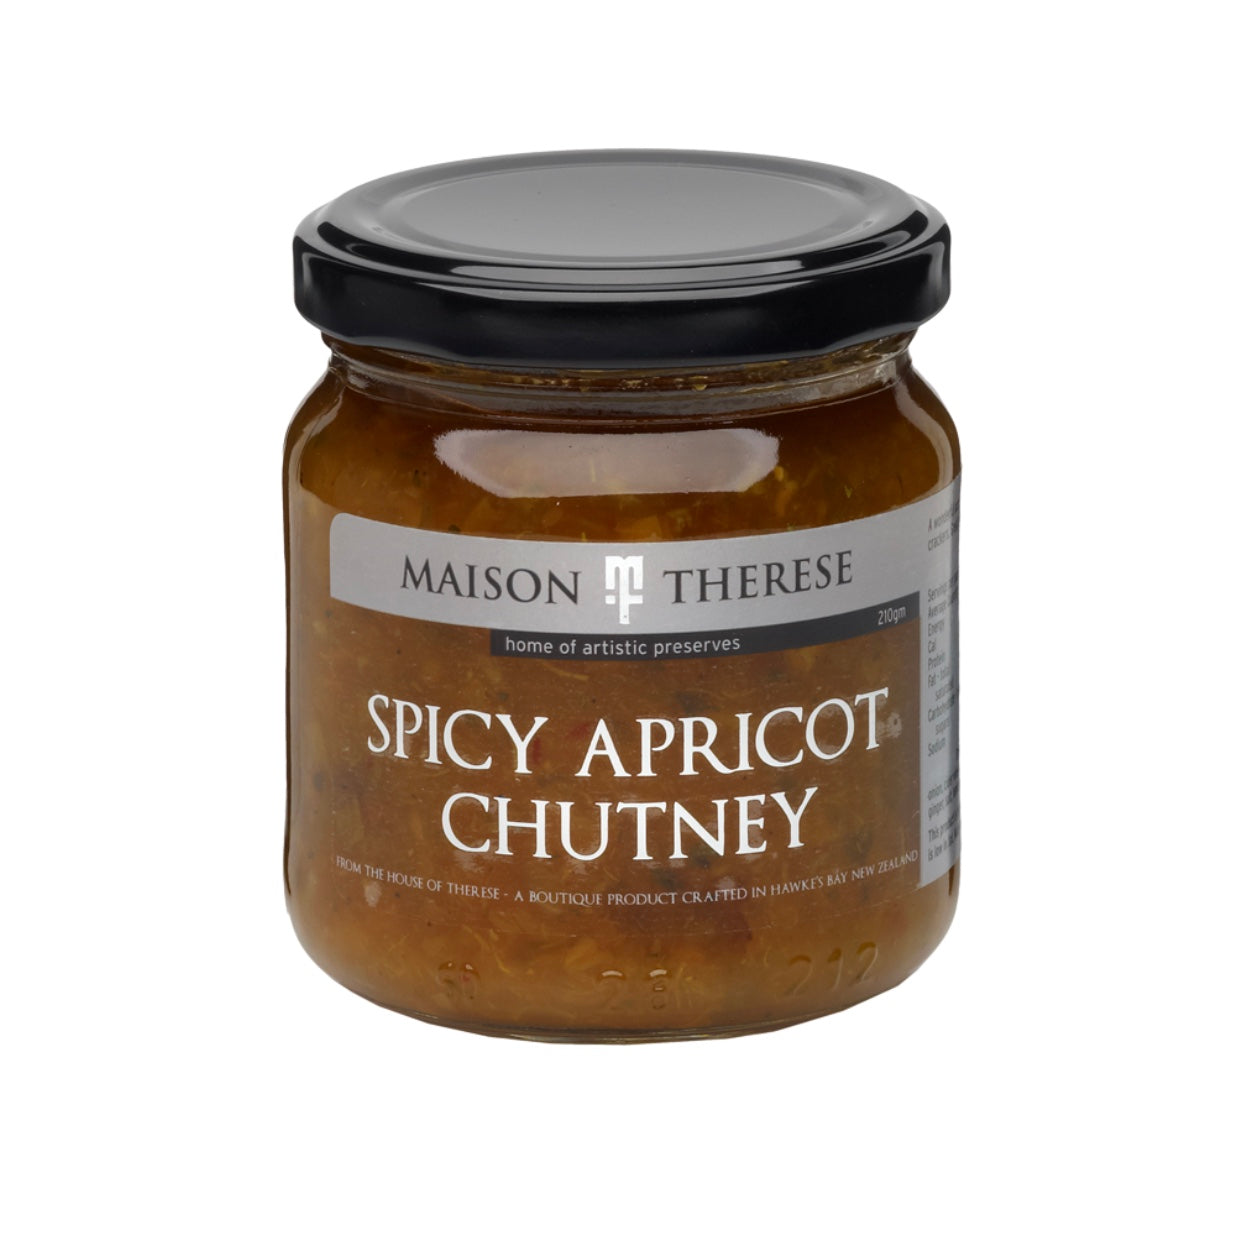 Maison Therese Spicy Apricot Chutney